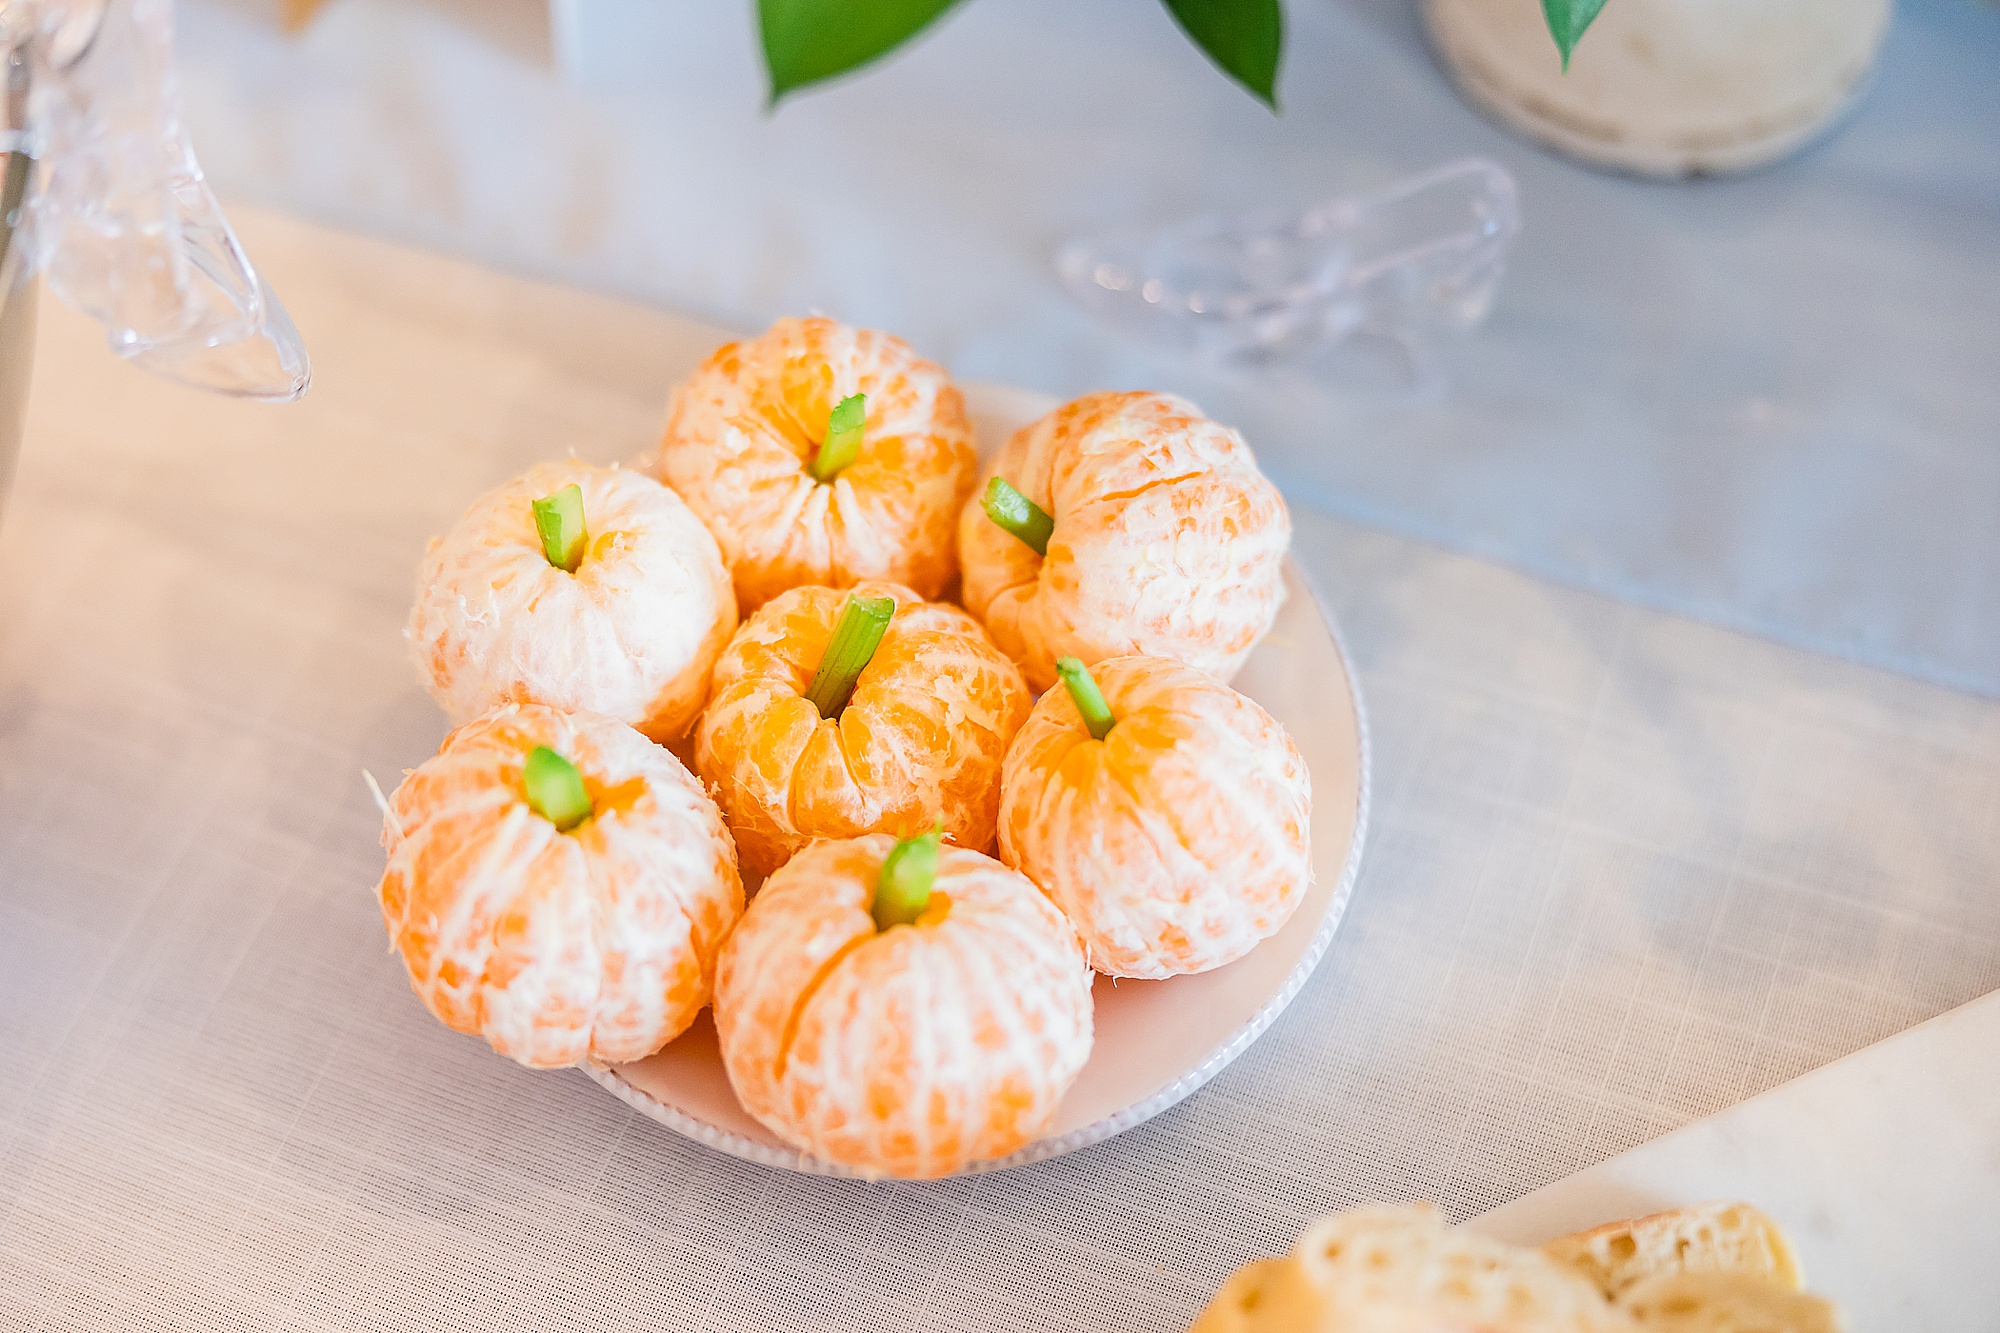 oranges designed to look like pumpkins for birthday party 